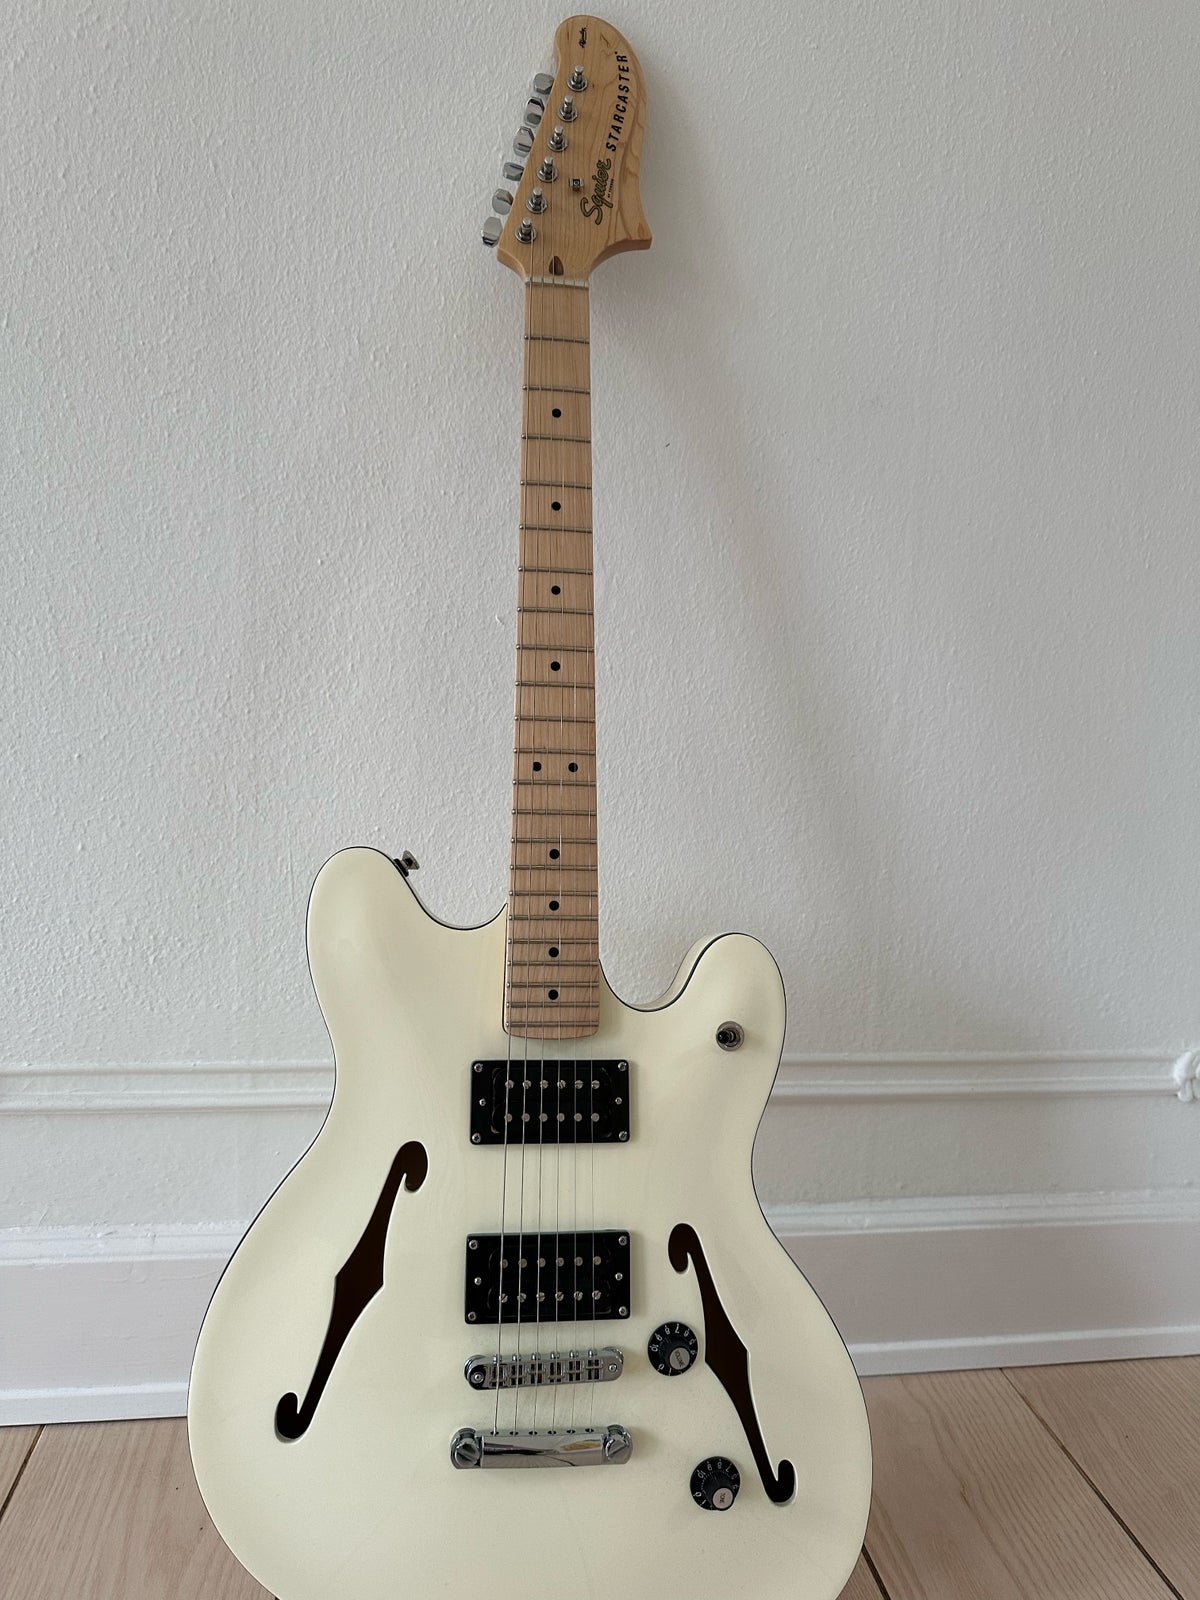 Elguitar, Squier Affinity Starcaster MN Olympic White